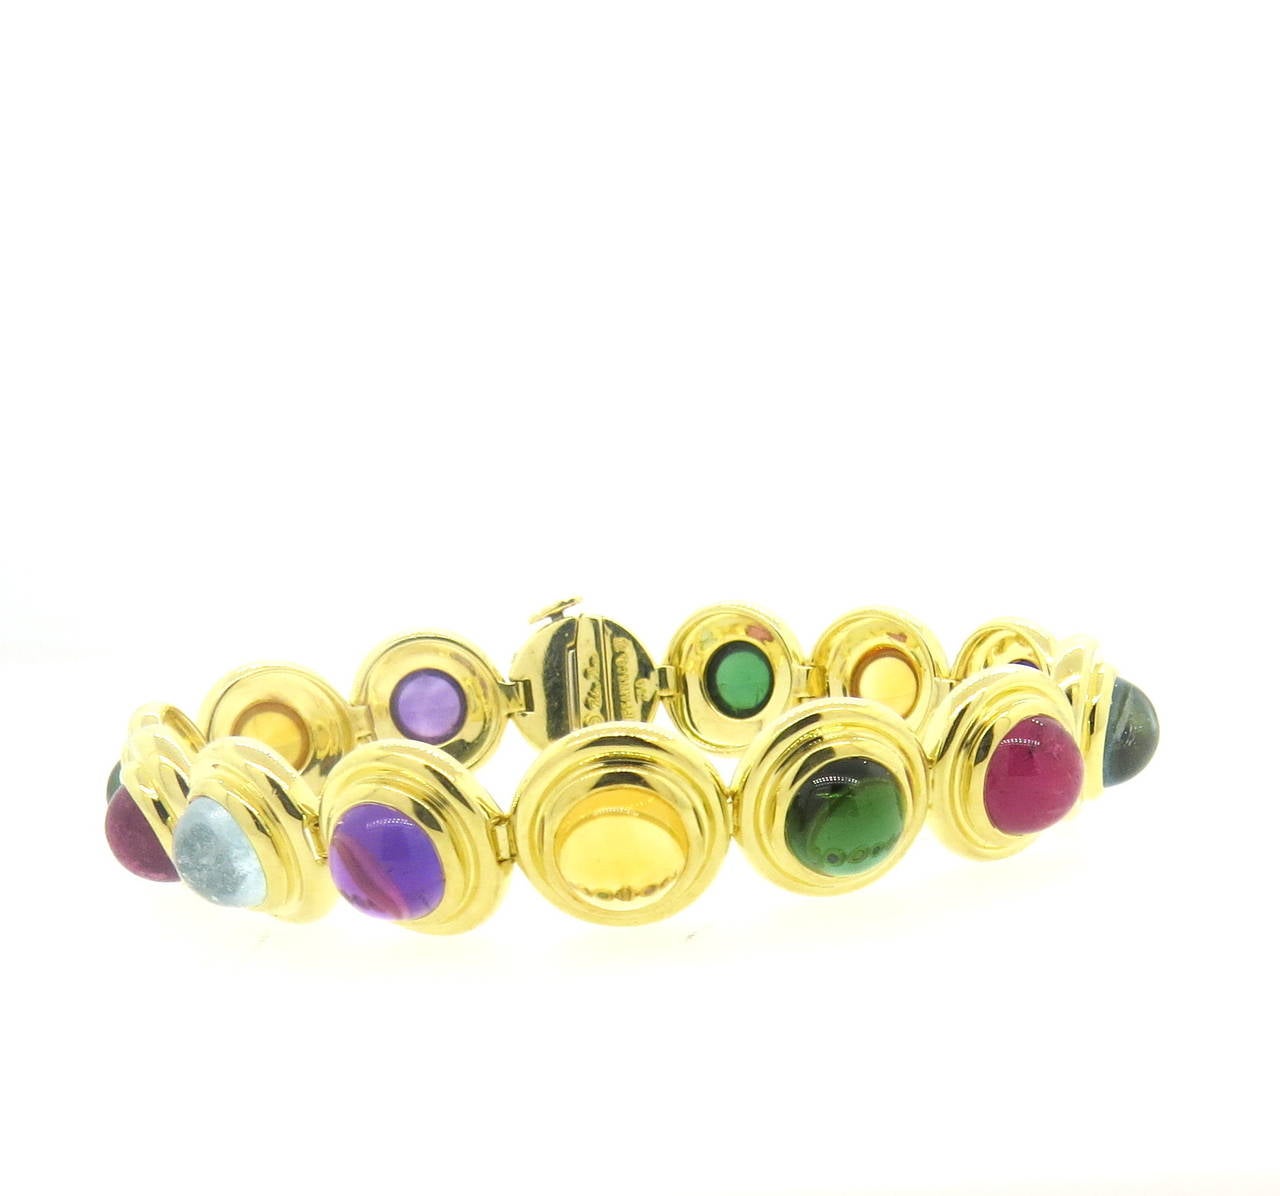 18k yellow gold bracelet, crafted by Paloma Picasso for Tiffany & Co, featuring multicolor gemstone cabochons :aquamarine, green and pink tourmaline, amethyst, citrine, peridot. Bracelet is 7